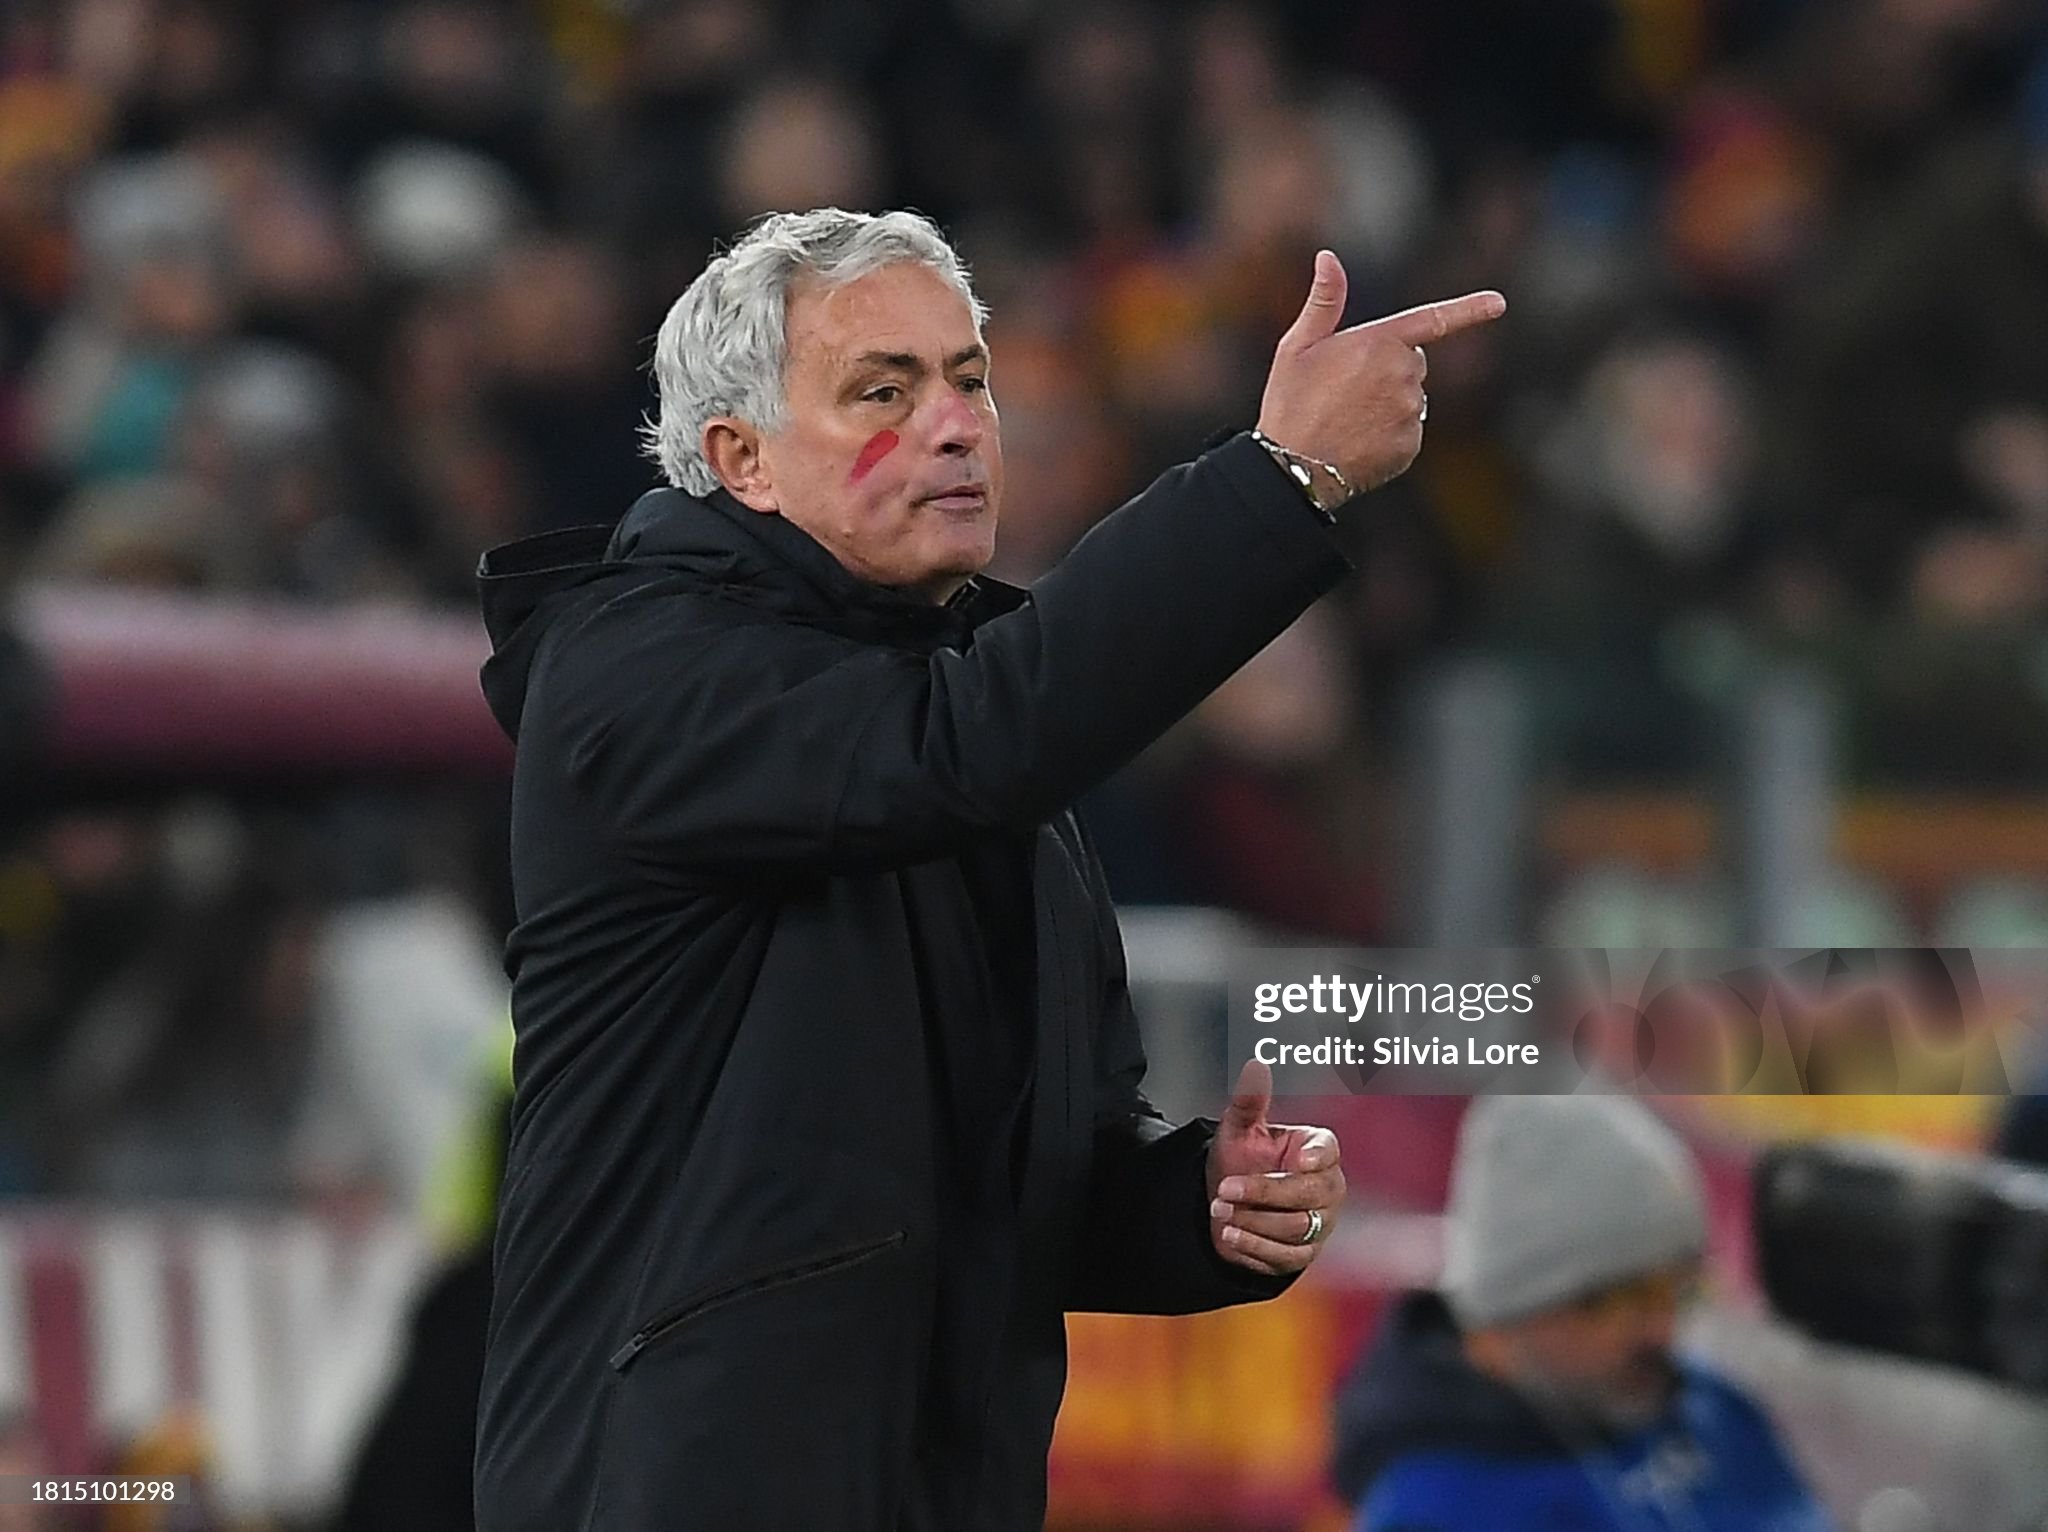 'Bandit' Mourinho sees sweethearts at Roma: 'They miss their grandma's desserts'